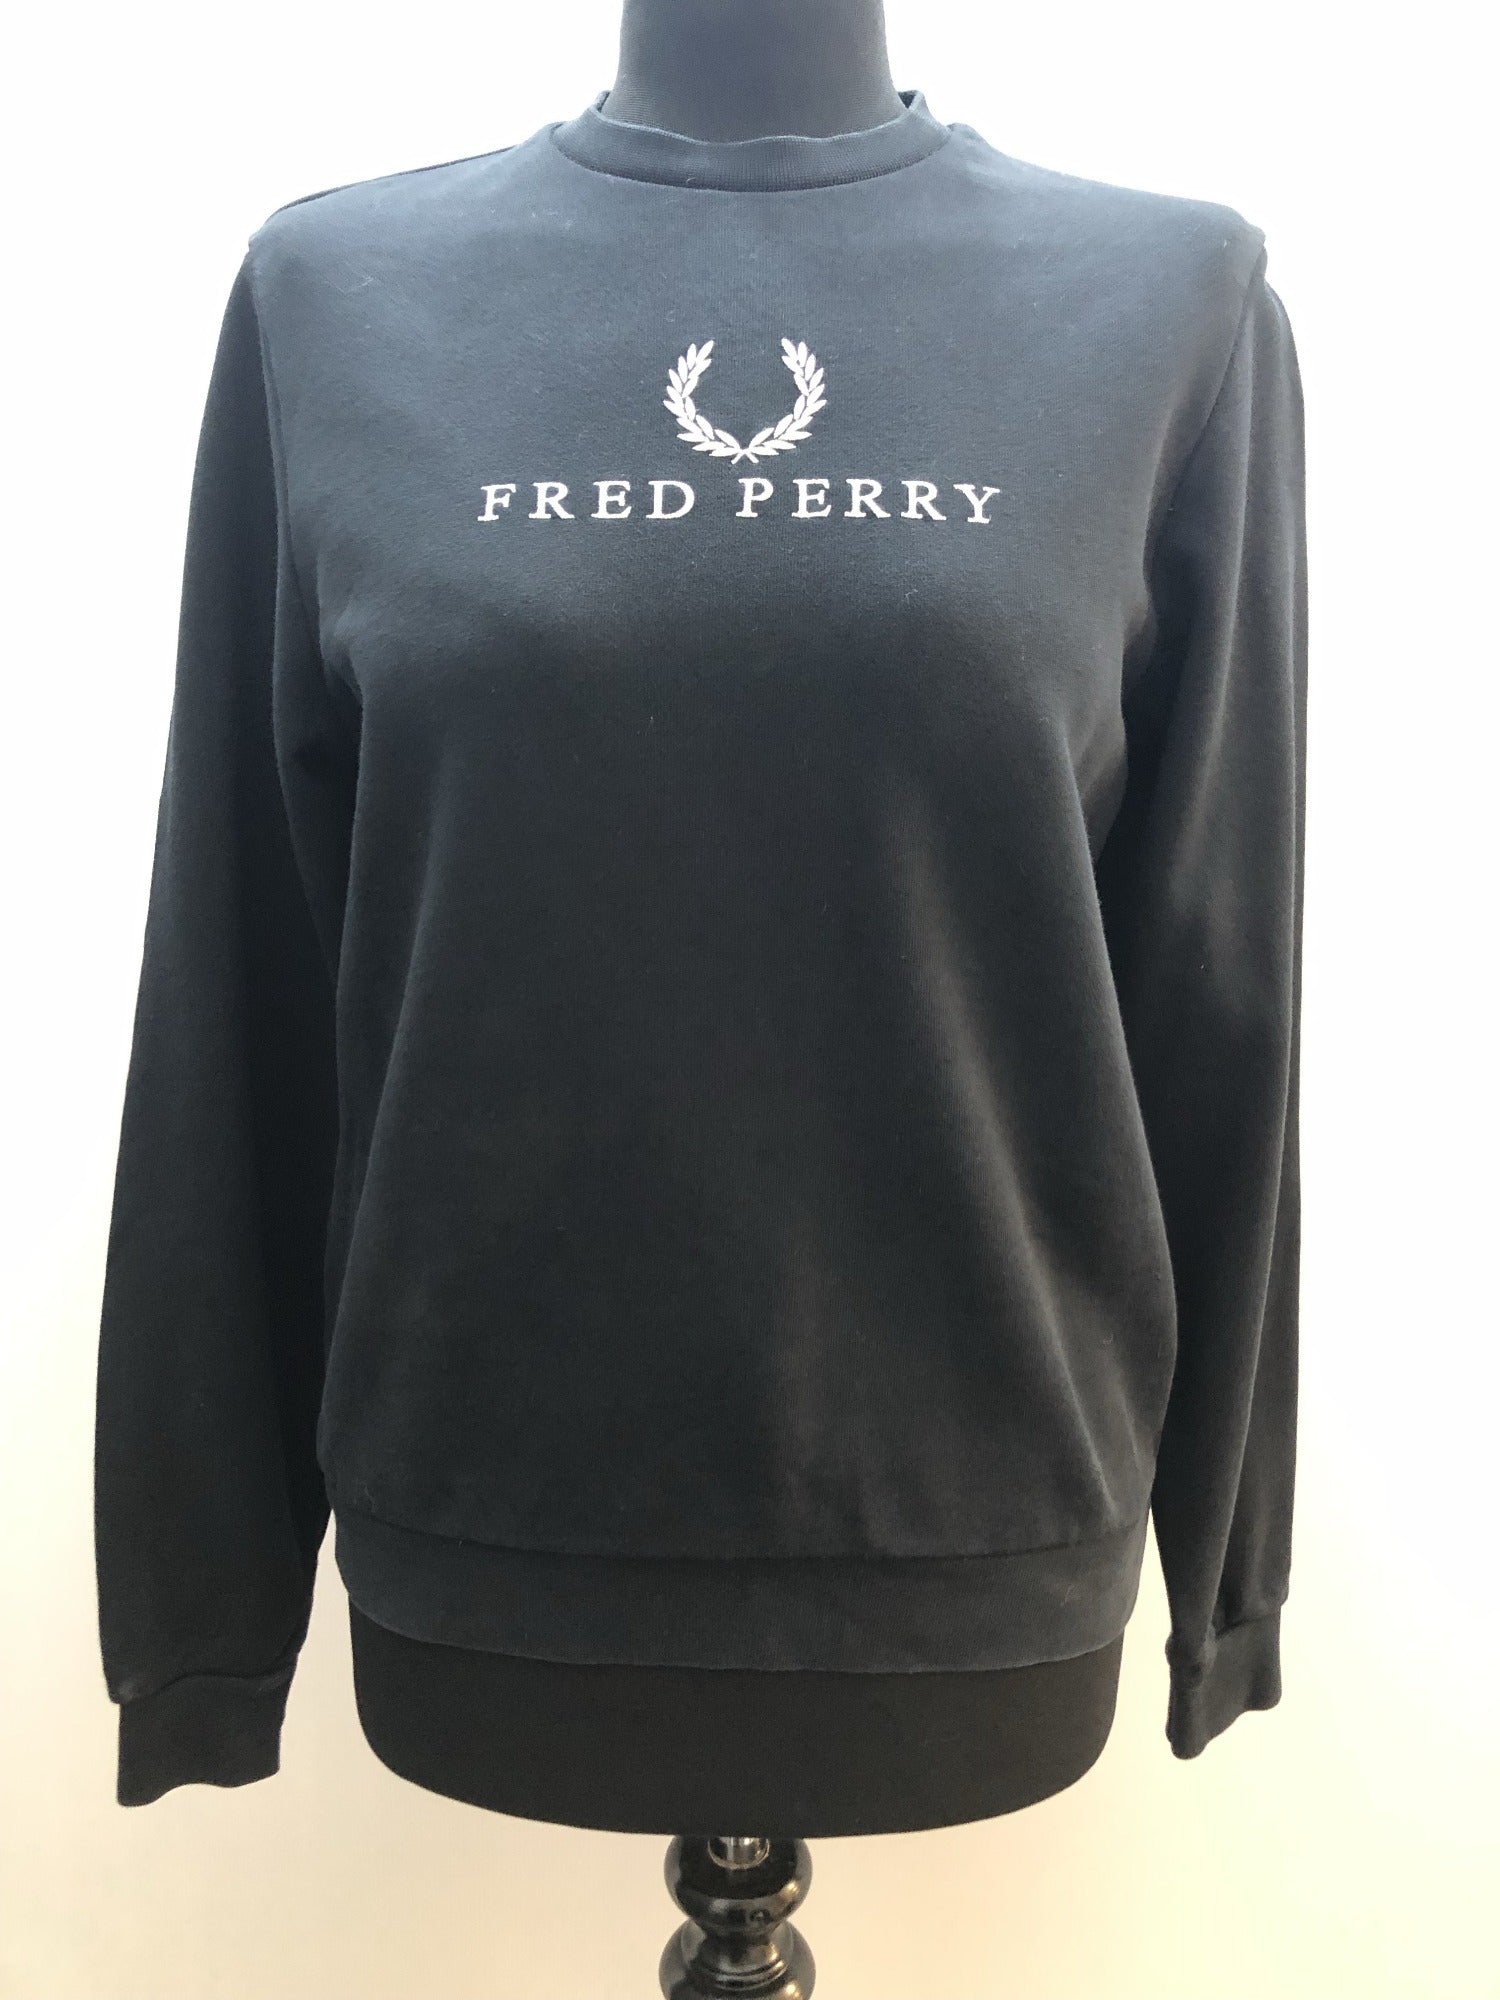 womens jacket  womens  vintage  Urban Village Vintage  urban village  top  sweater  retro  Fred Perry  embroidered logo  Embroidered  black  10